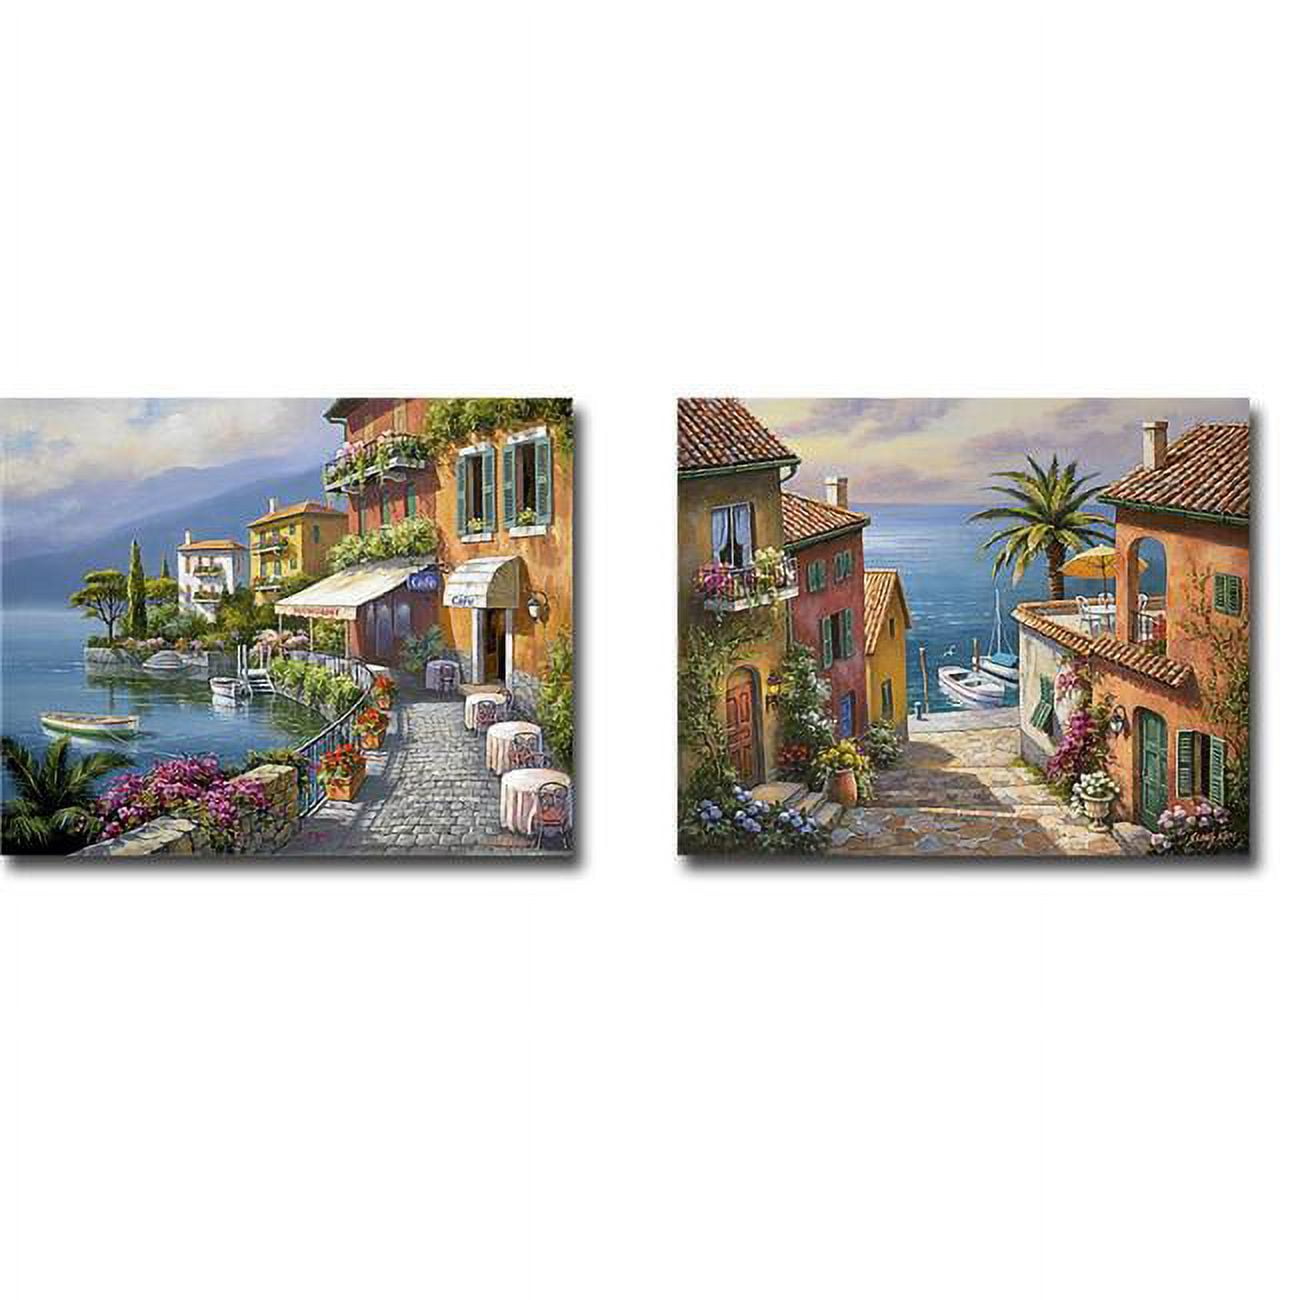 1215456ig Seaside Bistro Cafe & The Villas Private Dock By Sung Kim 2-piece Premium Gallery Wrapped Canvas Giclee Art Set - 12 X 15 In.